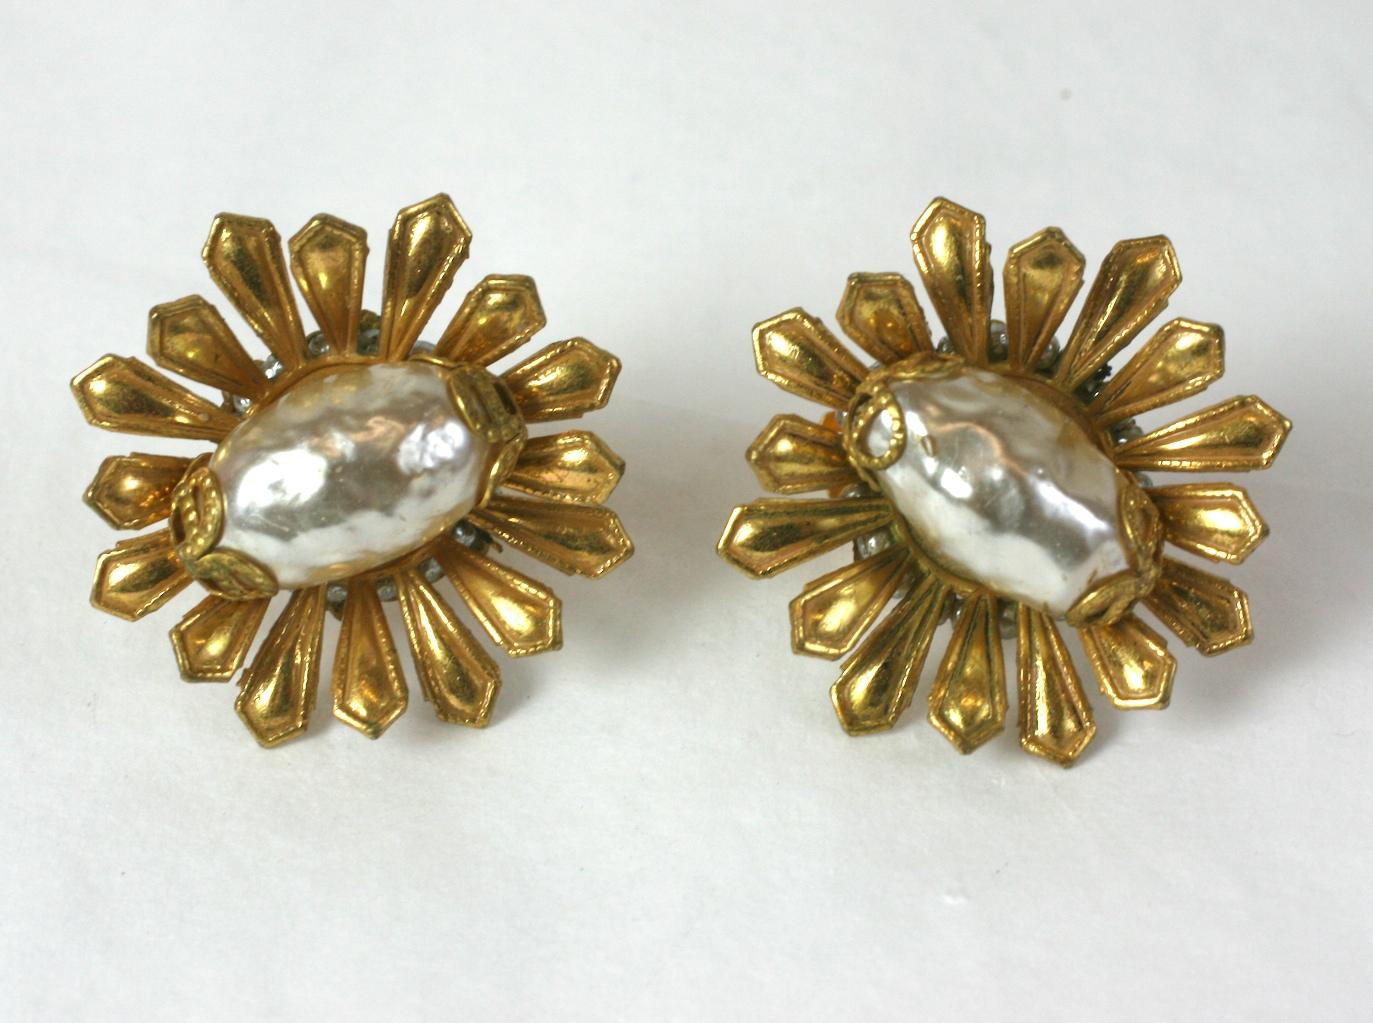 Dimensional Miriam Haskell Gilt Flower Earrings with signature faux baroque pearl. Clip back fittings with tiny seed pearl detail sewn around filigree base.  Signature Russian gilt finish. 1950's USA. Signed. 
1.25